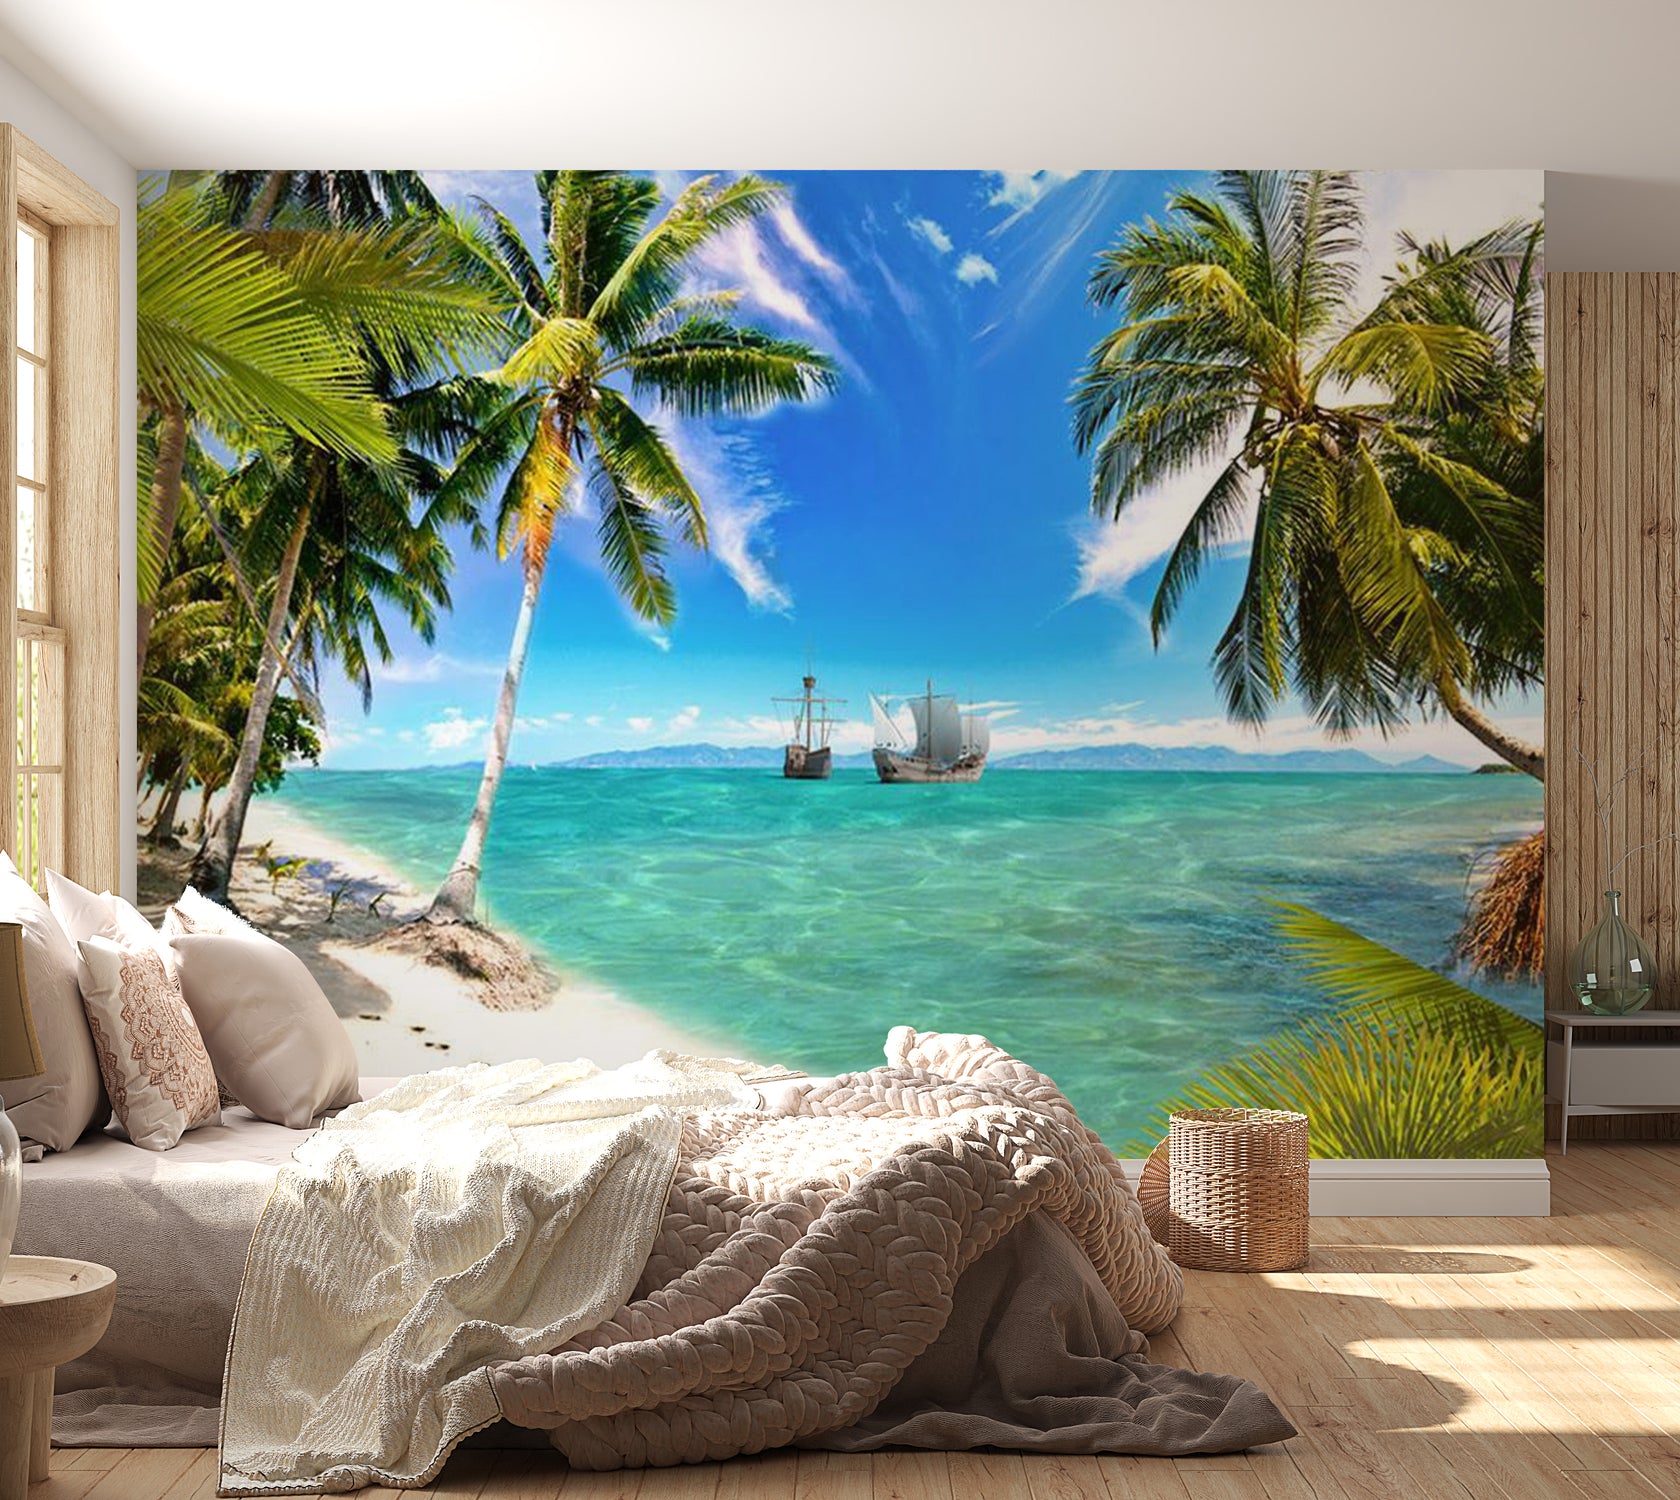 Peel & Stick Beach Wall Mural - Lost Ships - Removable Wall Decals